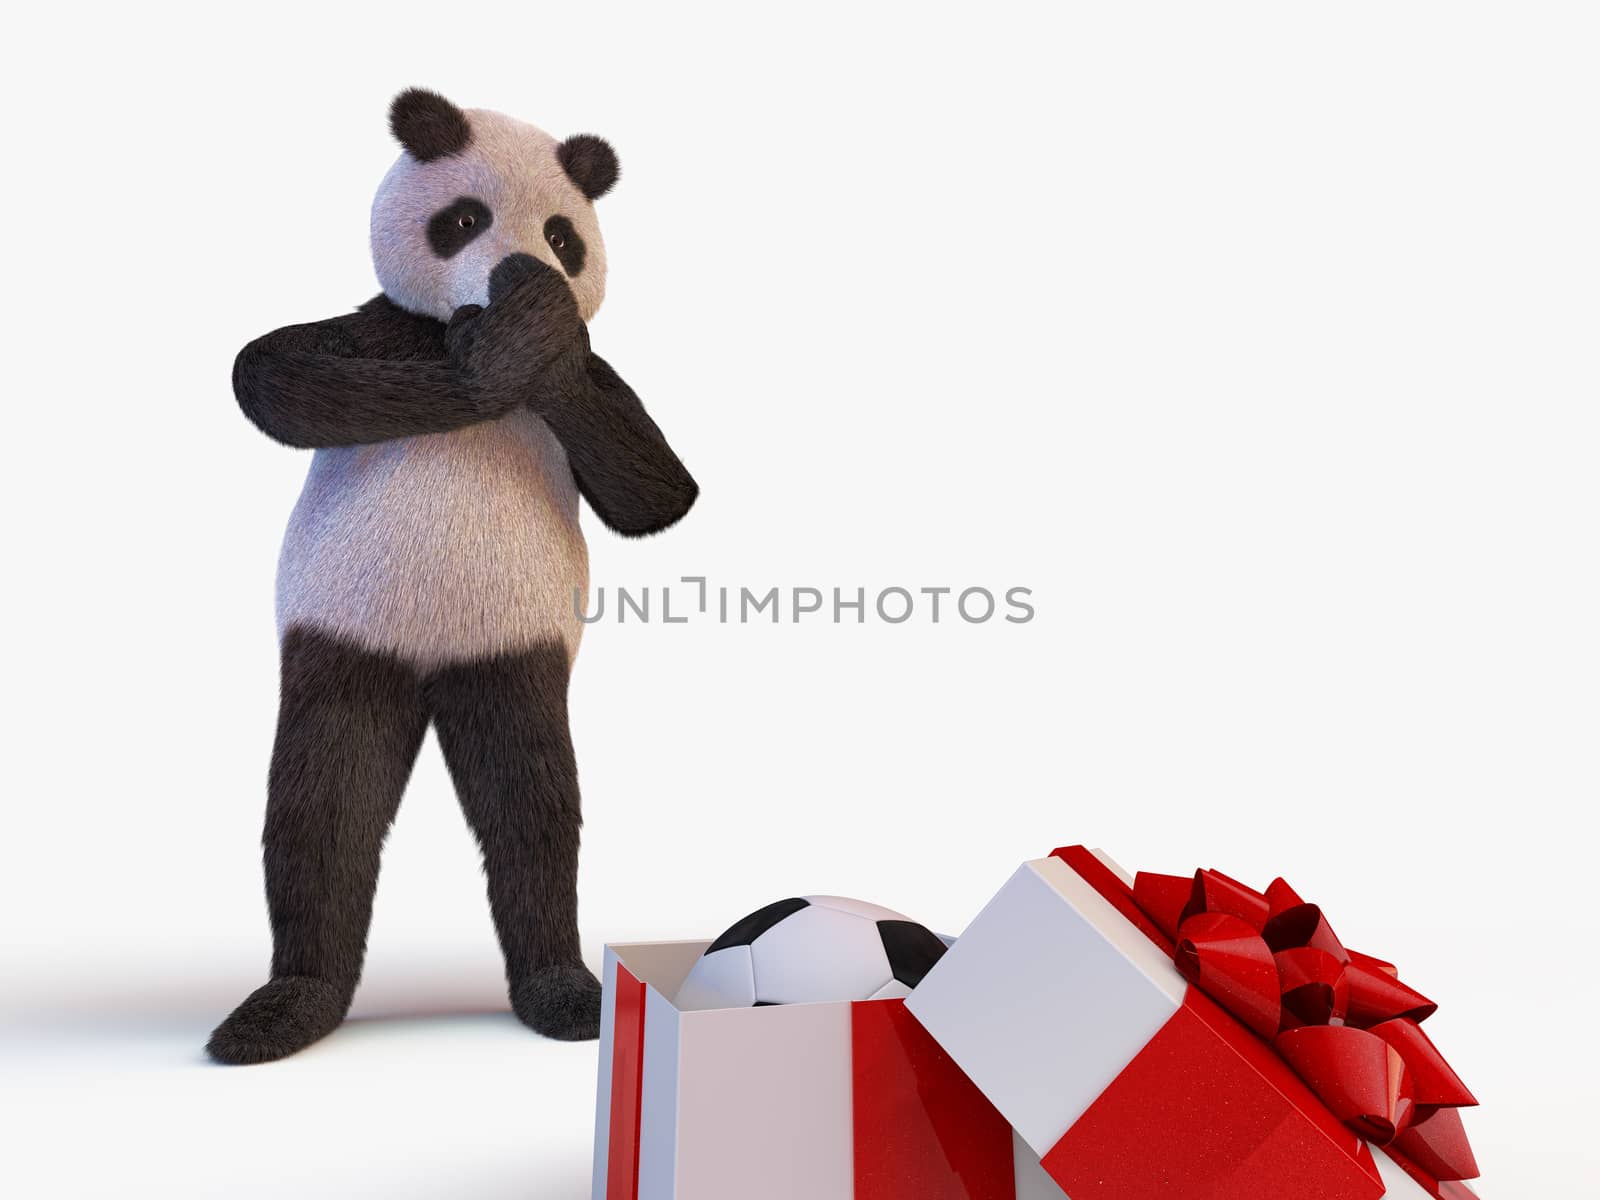 joyful cute protagonist character giant panda bamboo stands and looks at half-open box with a gift inside of which is new soccer ball. surprise birthday closes muzzle paws by xtate